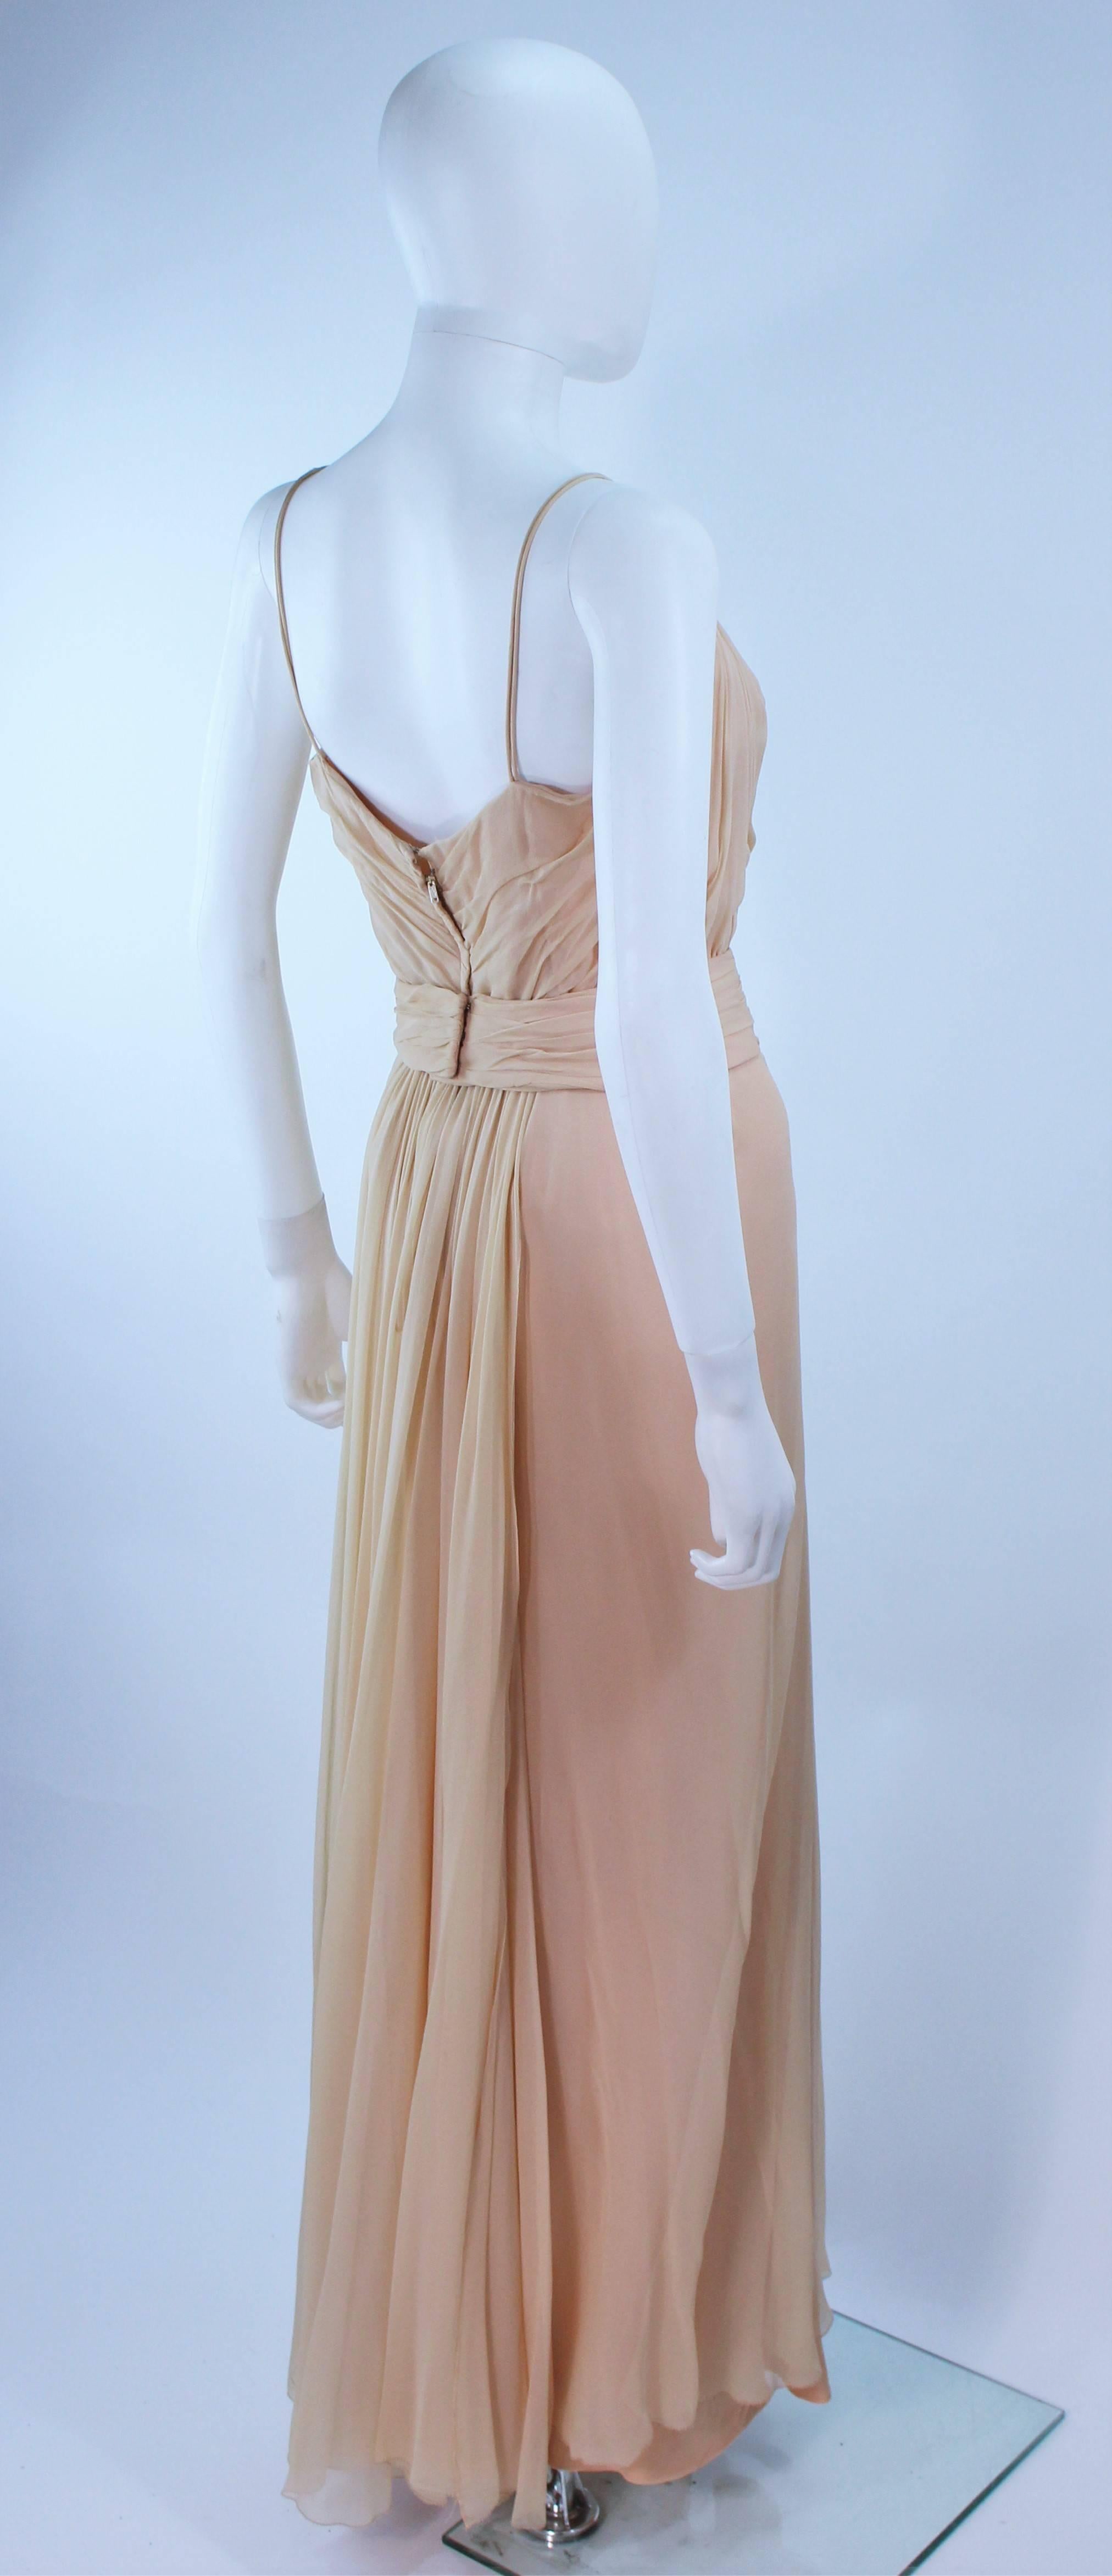 CEIL CHAPMAN Nude Chiffon Draped Gown Size 2 4 For Sale 3